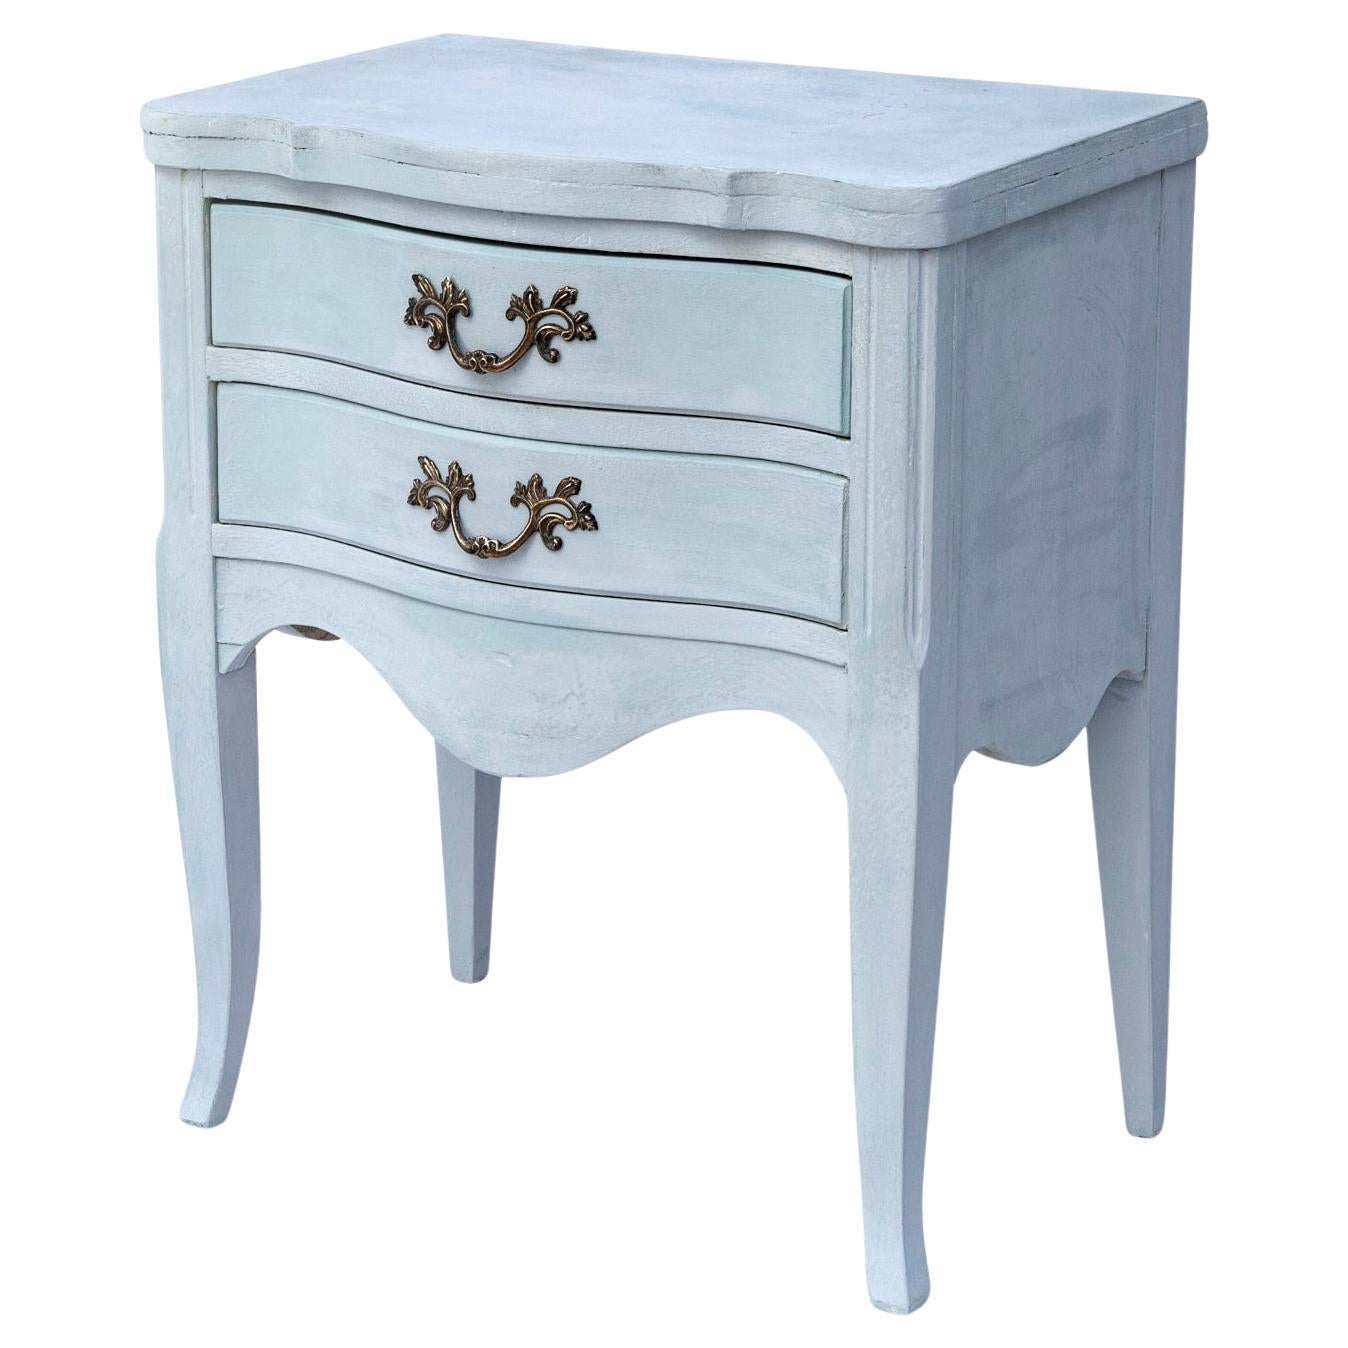 Hand painted pair of Midcentury French Provincial nightstands/commodes in shades of ocean blues over mahogany. Each nightstand has 2 spacious dovetailed drawers with white oak interiors.
Very well-made sturdy construction.